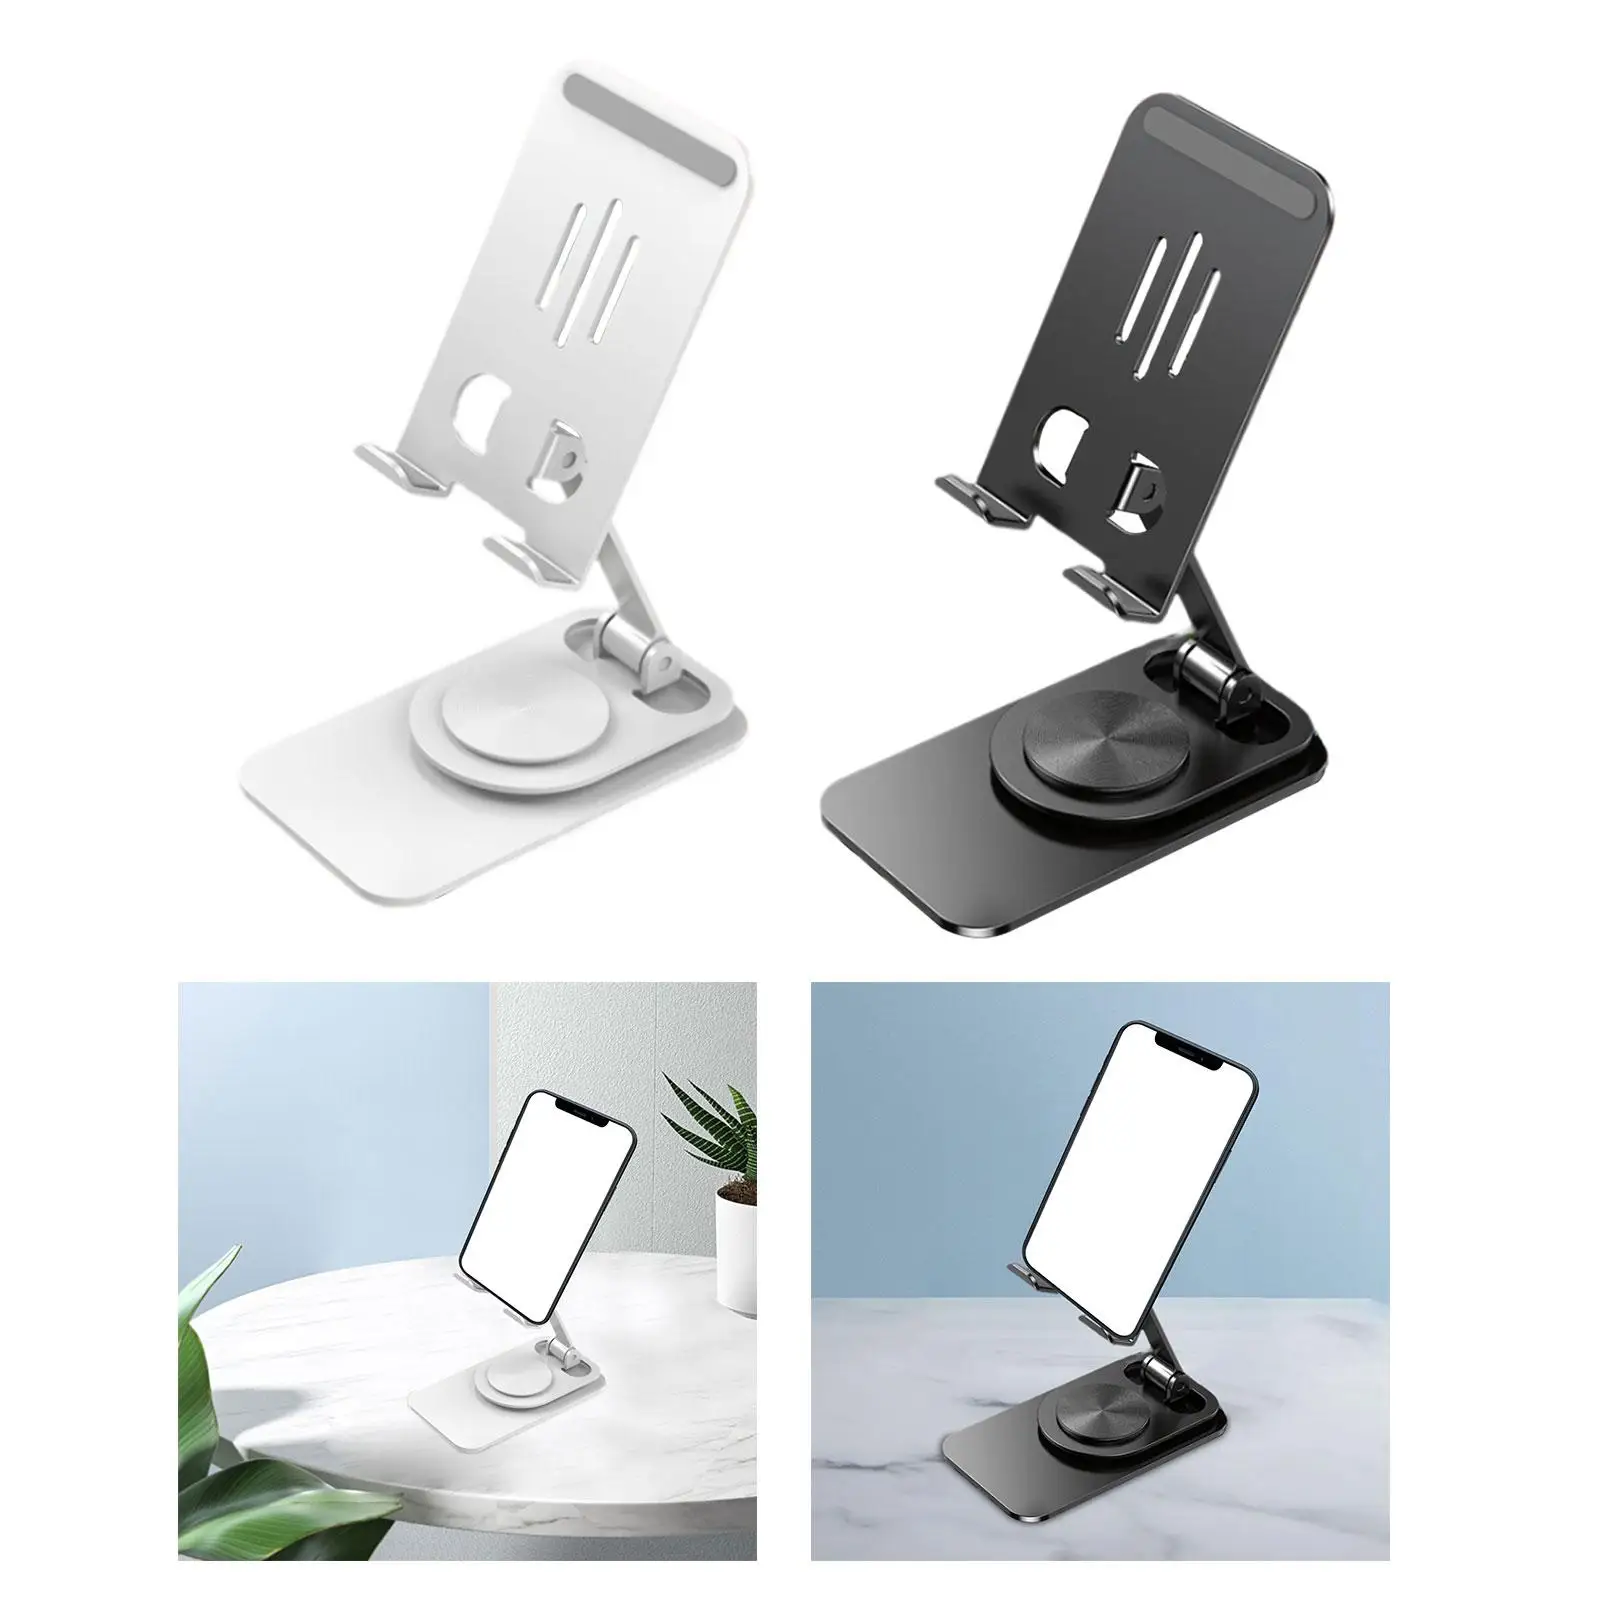 Phone Stand Foldable Non Slip Angle Height Universal Adjustable Desktop Phone Holder for Phone All Phones Tablet Cell Phone Desk